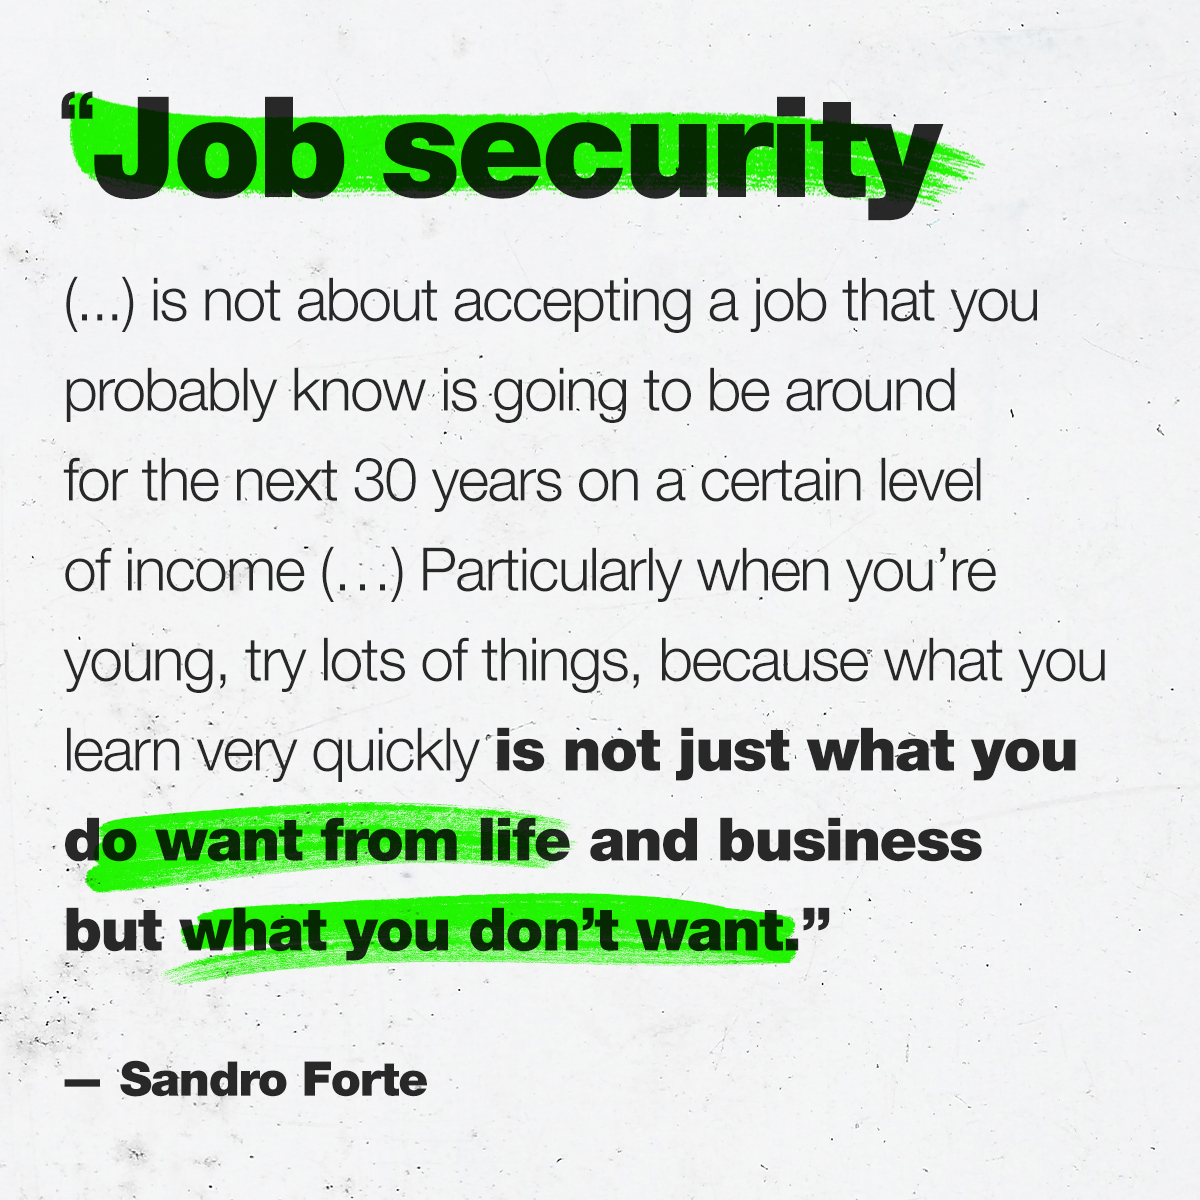 “Job security ( … ) is not about accepting a job that you probably know is going to be around for the next 30 years on a certain level of income ( … ) Particularly when you’re young, try lots of things, because what you learn very quickly is not just what you do want from life and business but what you don’t want.” –– Sandro Forte